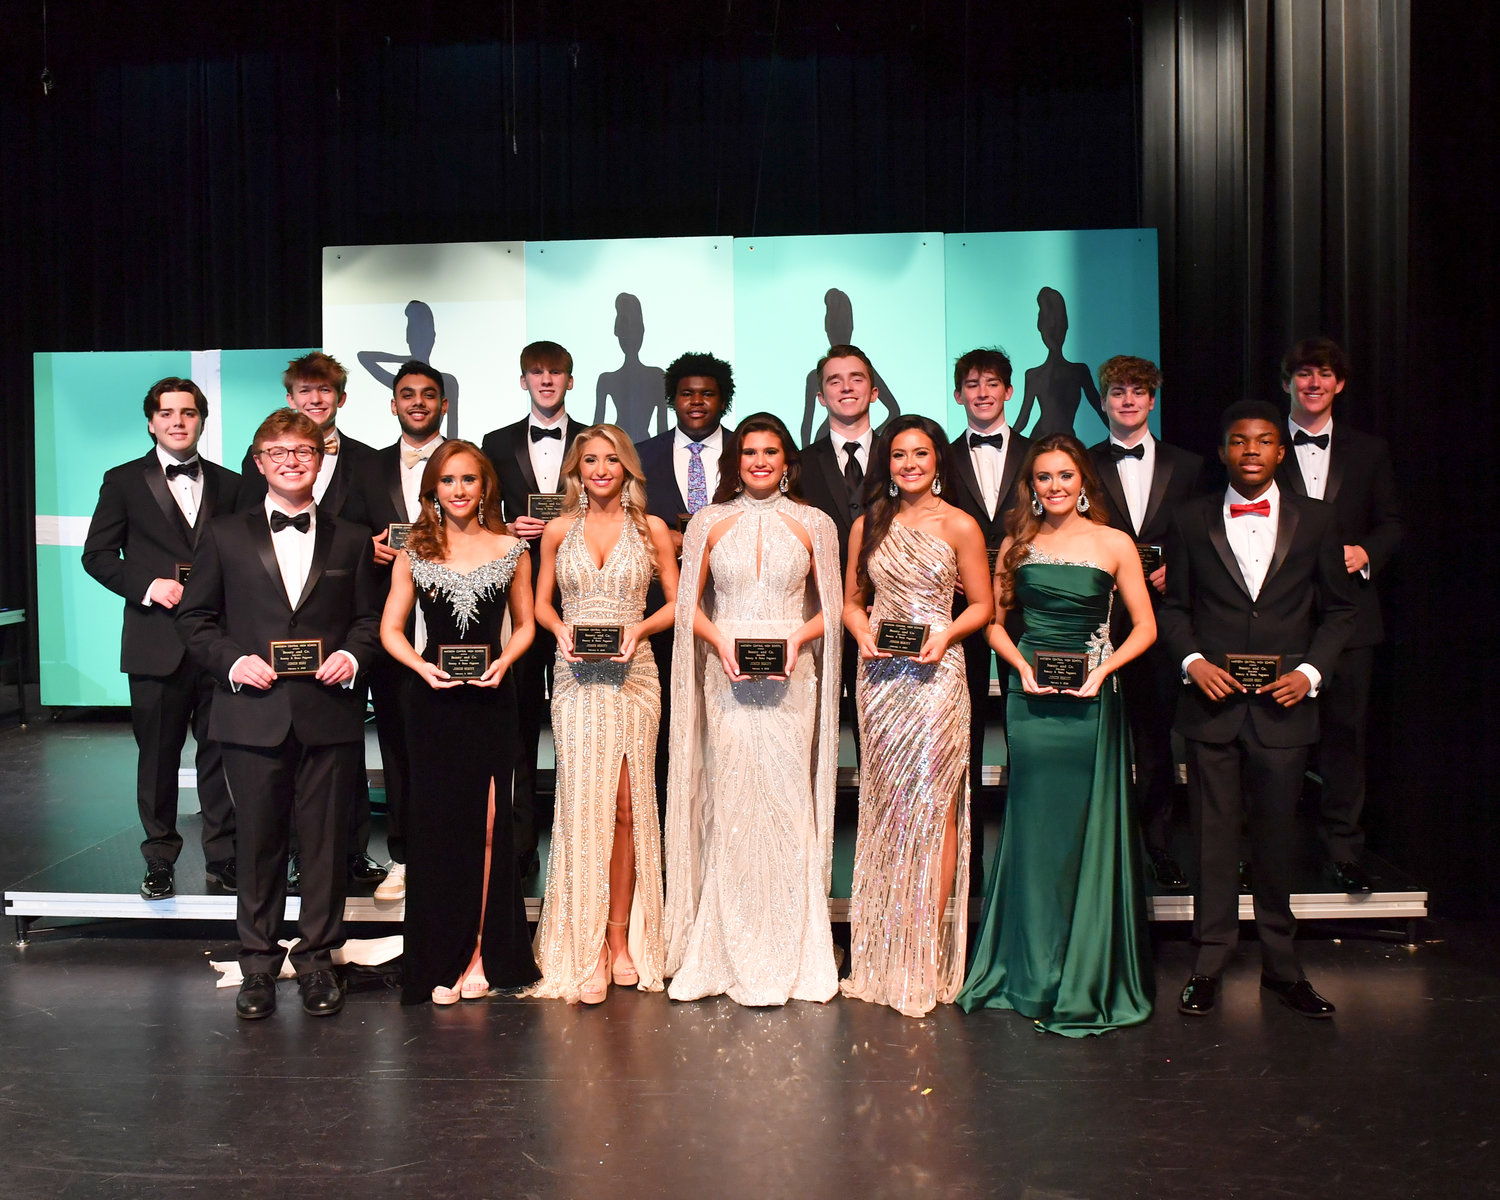 The following juniors were awarded, back row, left to right, beaus Will Brown, Camden Hood, Harry Singh, Reed Cascio, John Griffin, Reese Moseley, Ty Miller, George Tickner, and Max Zuluaga, Front row left to right are beau Ellis Nichols, beauties Avery Johnston, Dixon Shirley, Katie Norris, Izzy Goddard, Nataleigh Nix, and beau Hayes Williams.